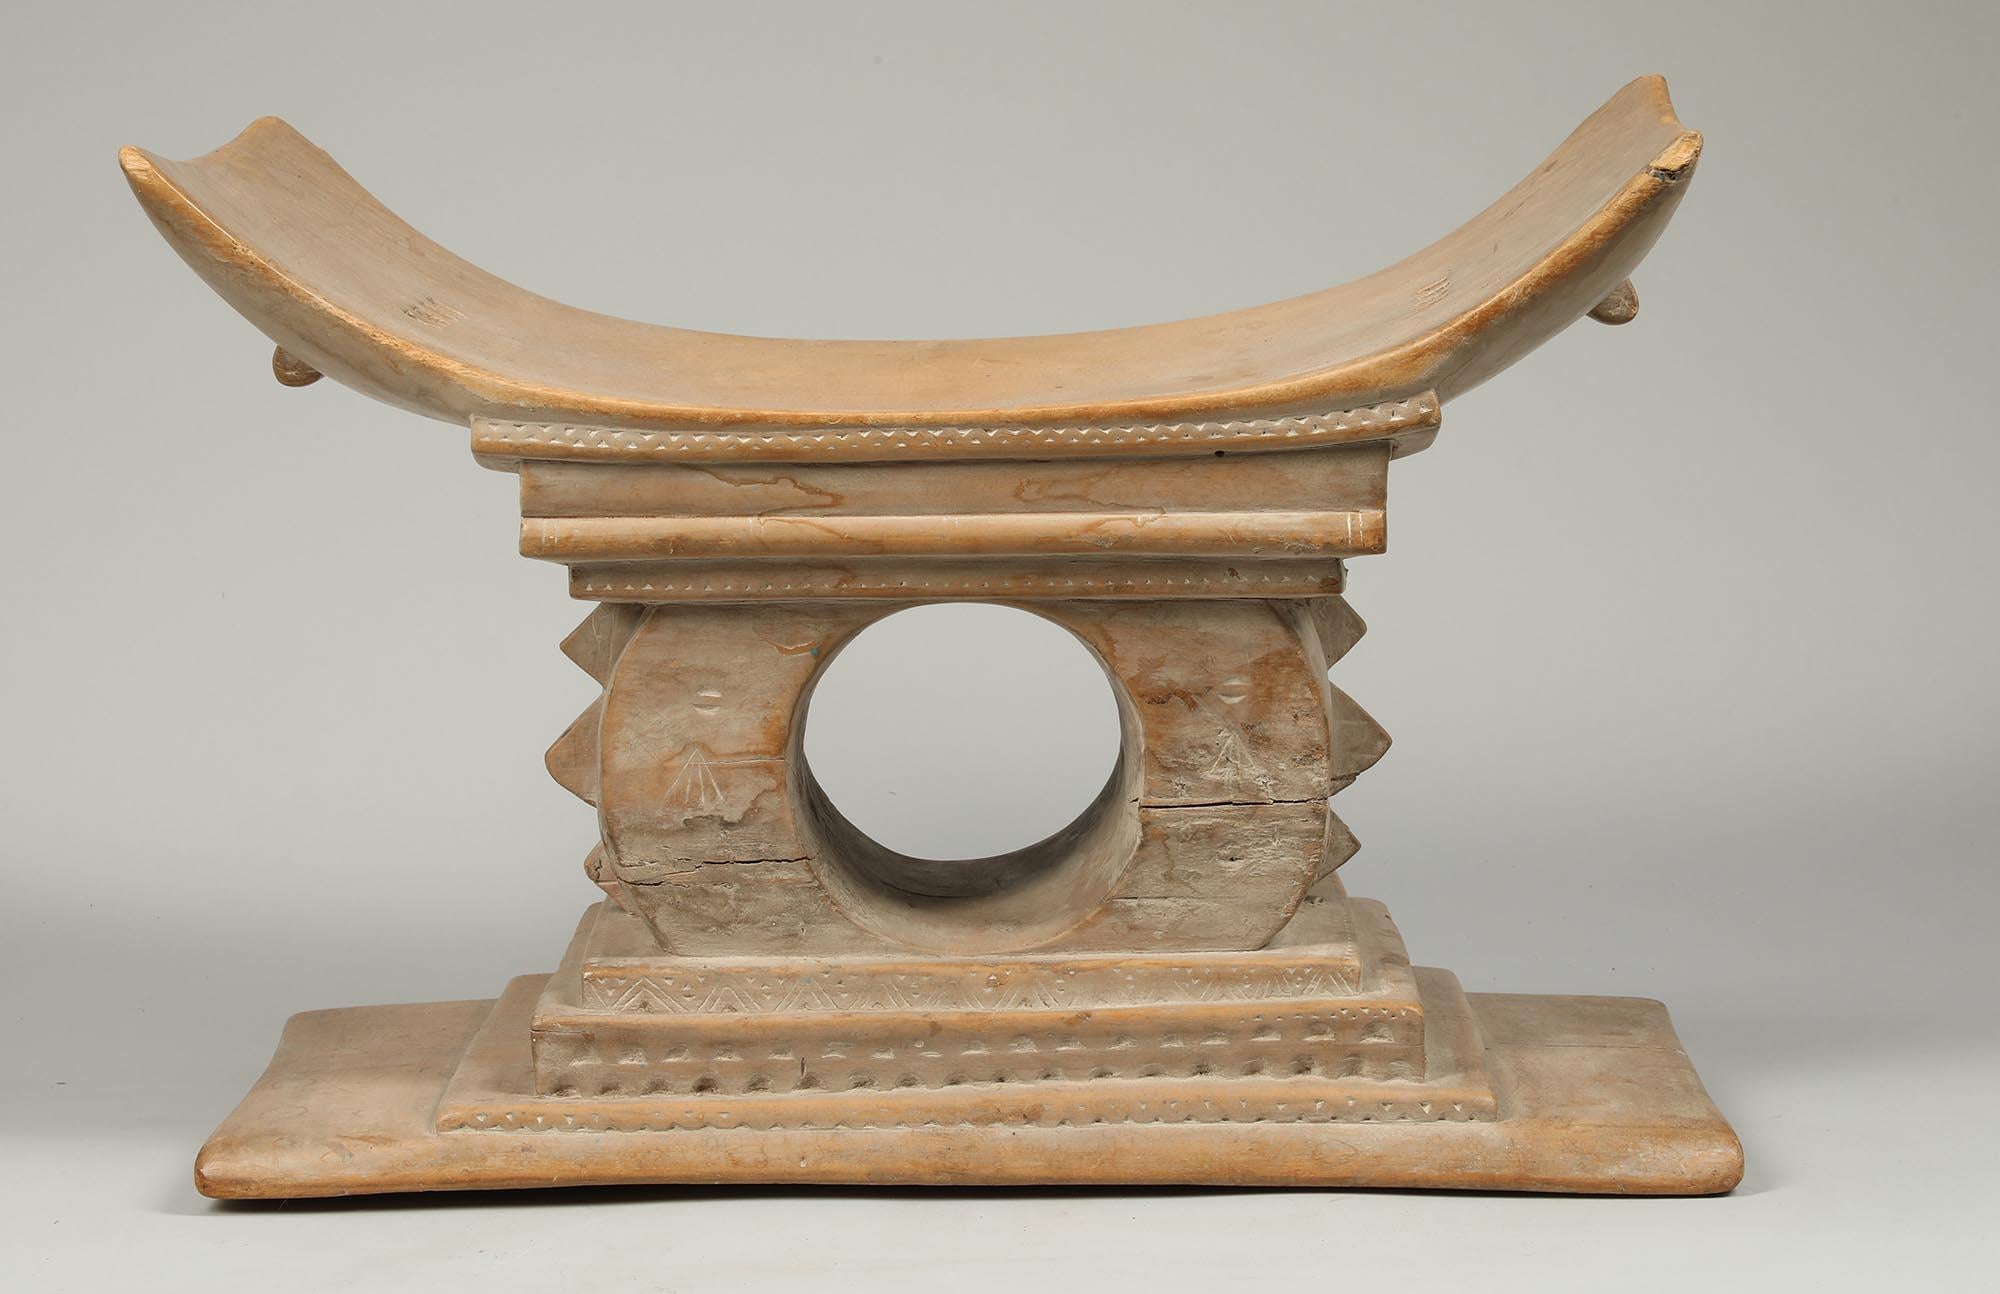 A well-loved traditional stool or seat from the Akan people of Ghana.  The supports for Akan stools take many forms, they can be purely geometric or architectural with simple posts and columns, or, as in this case, a open circular form supporting